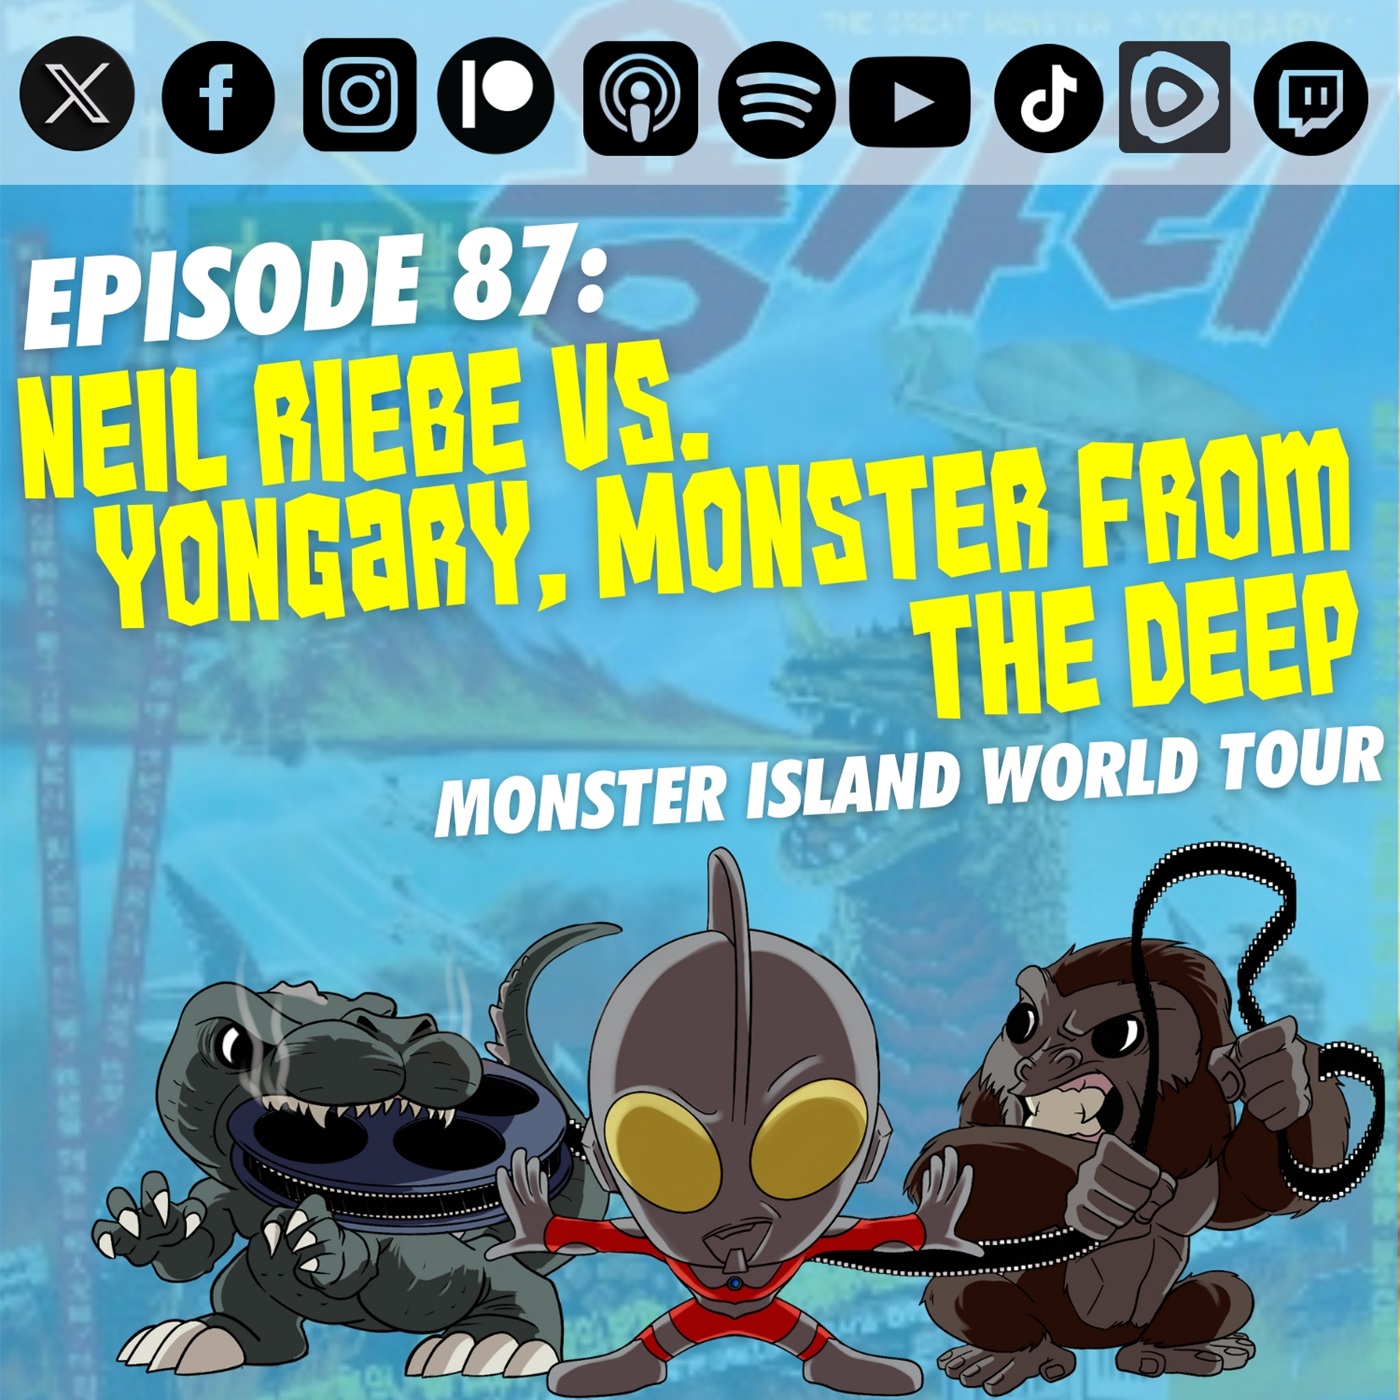 Episode 87: ‘Yongary, Monster from the Deep’ vs. Neil Riebe